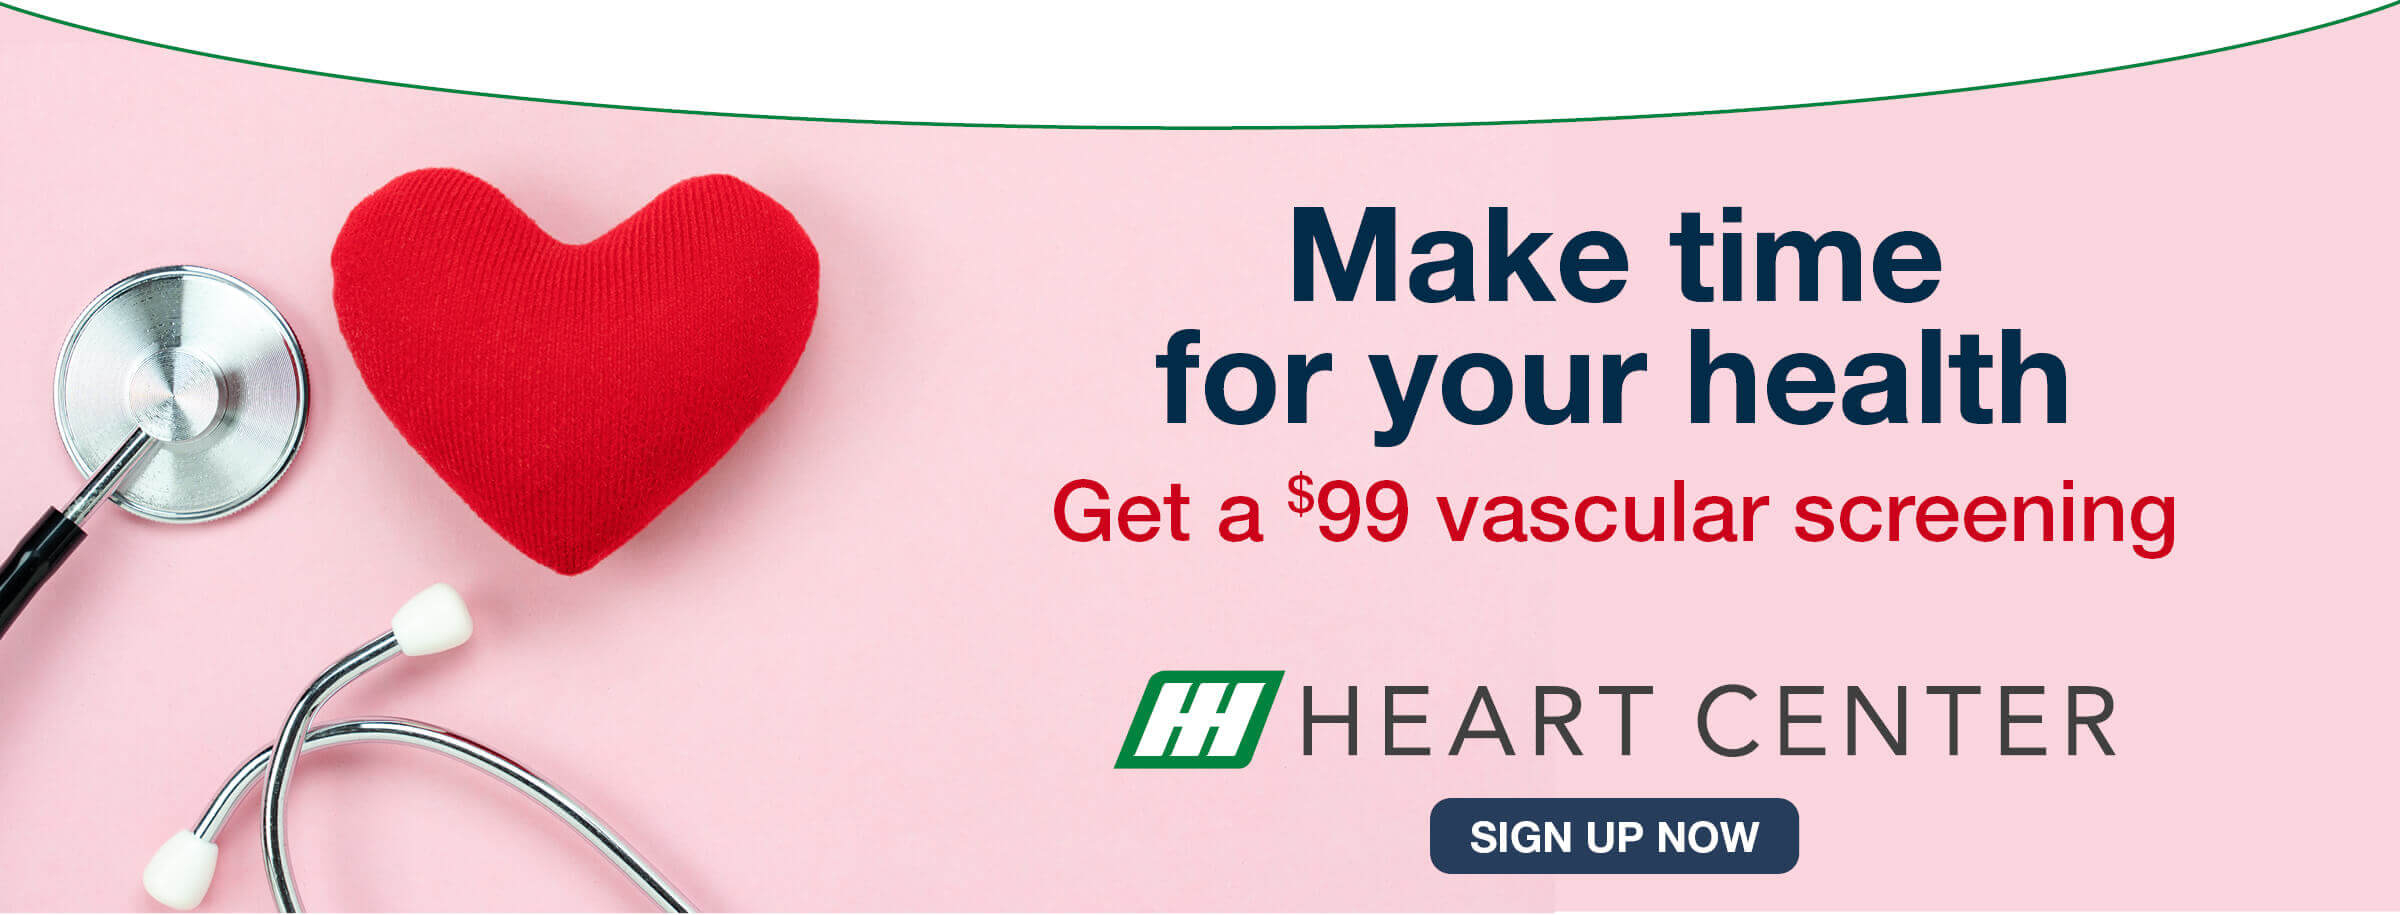 Make time for your health. Get a $99 Vascular screening. Sign up now.